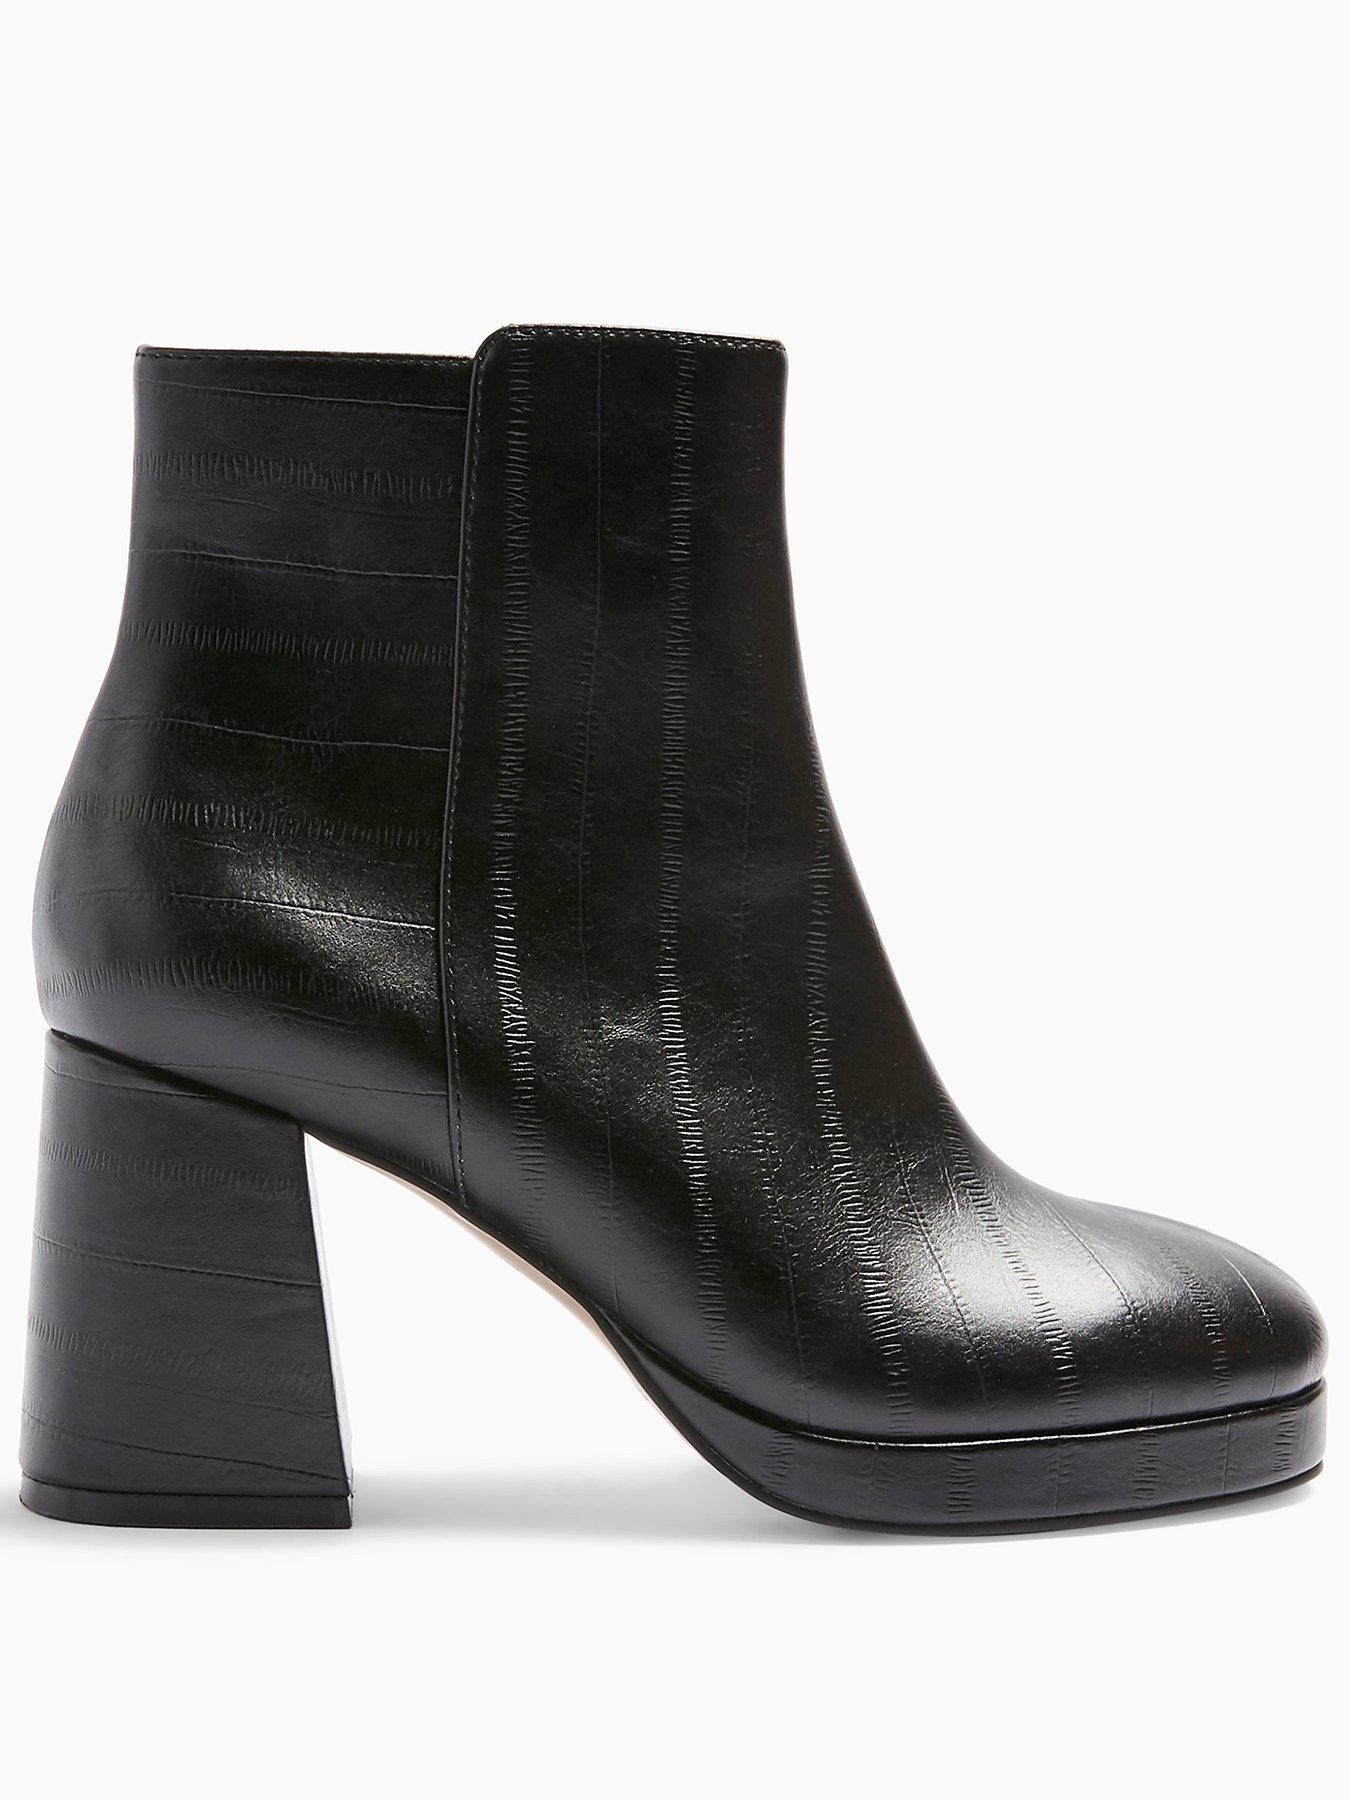 topshop ankle boots uk